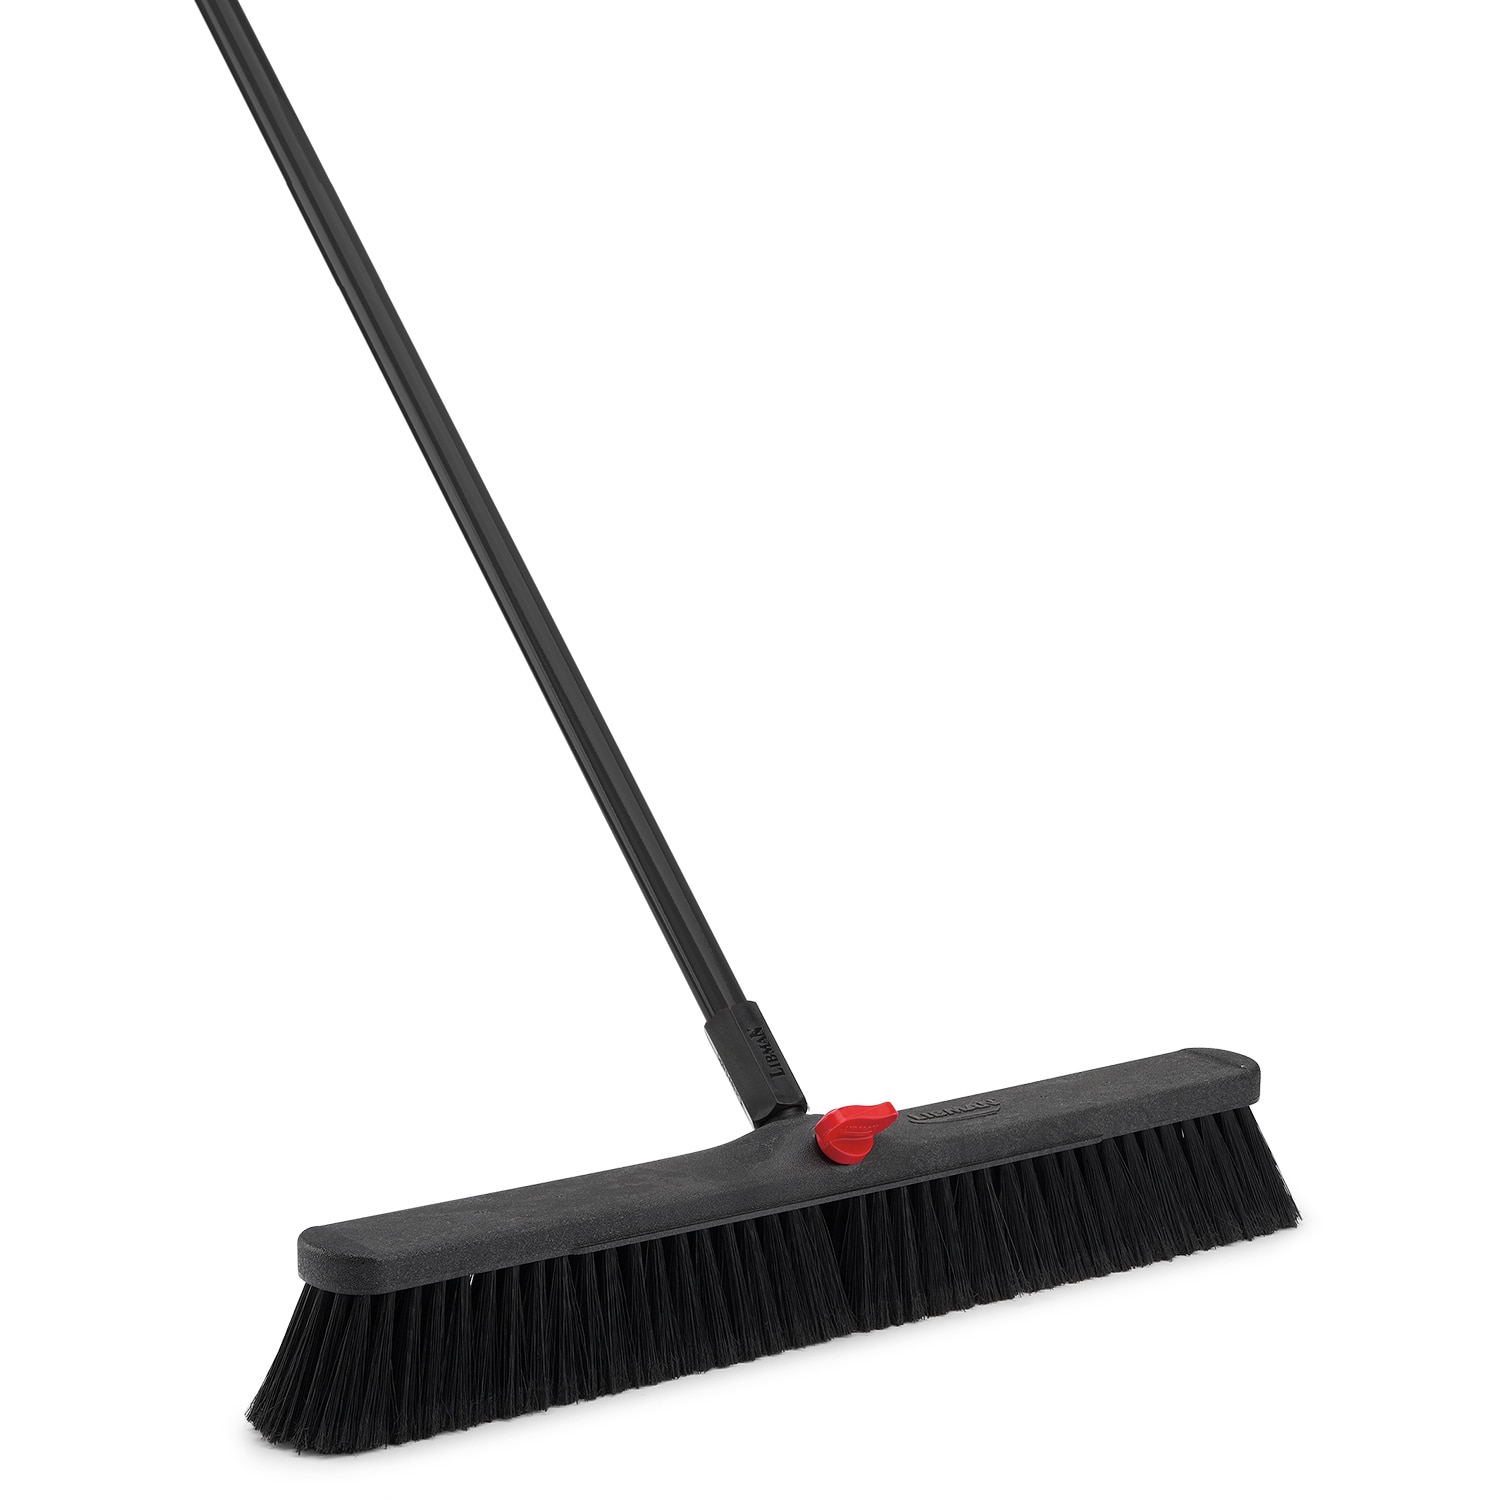 Libman Red / Black Angled Commercial Broom - 15L x 1W x 55H